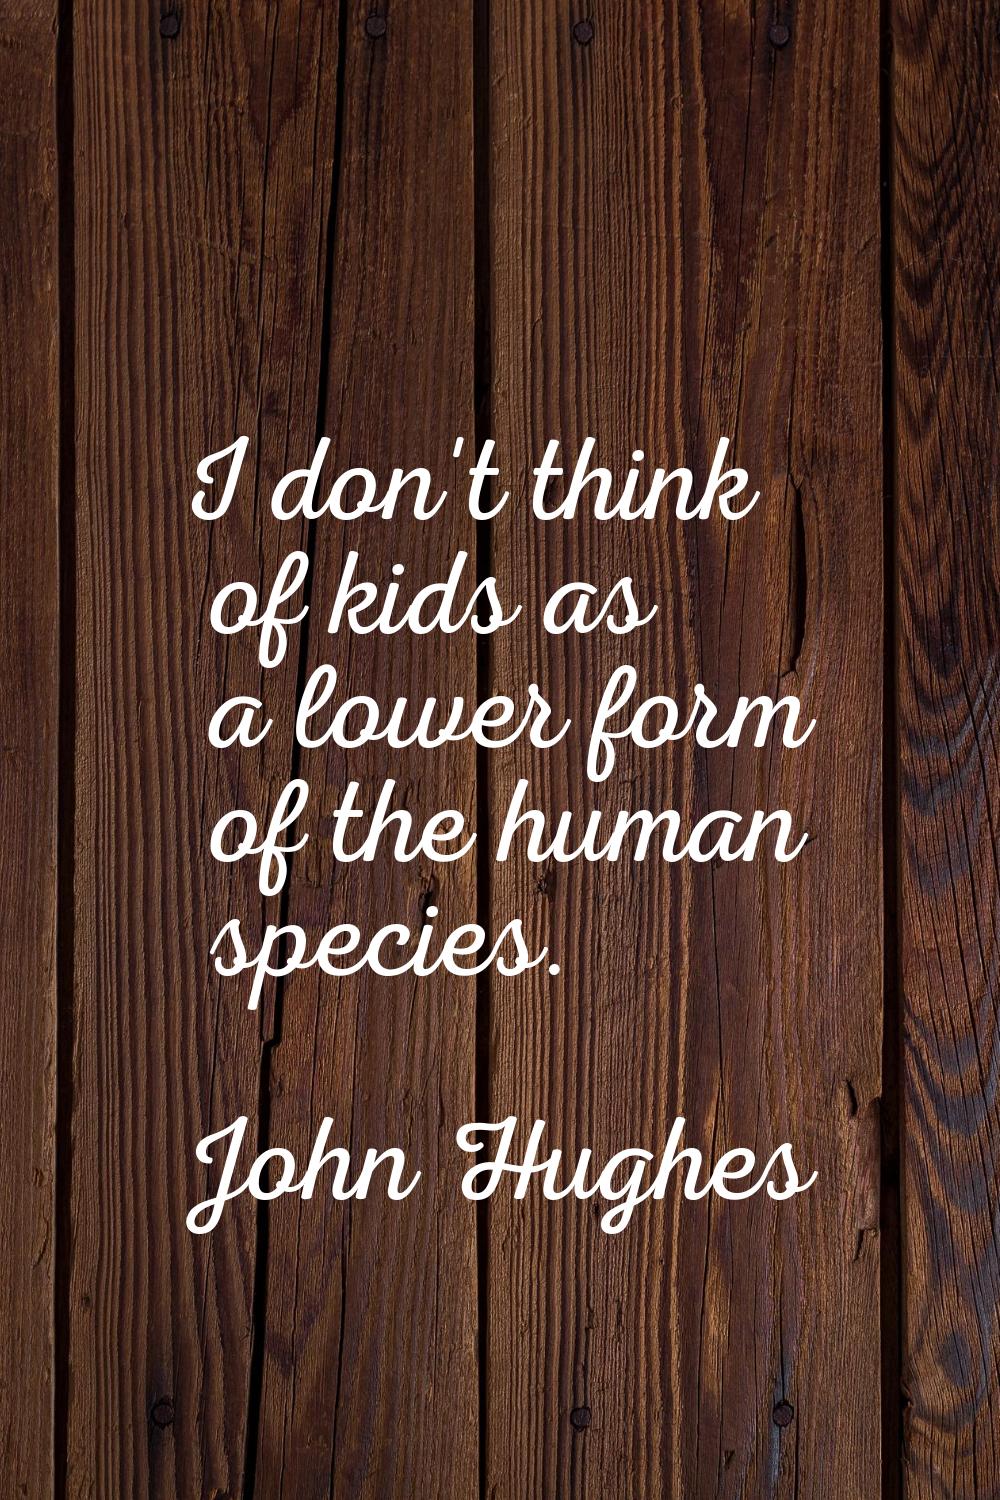 I don't think of kids as a lower form of the human species.